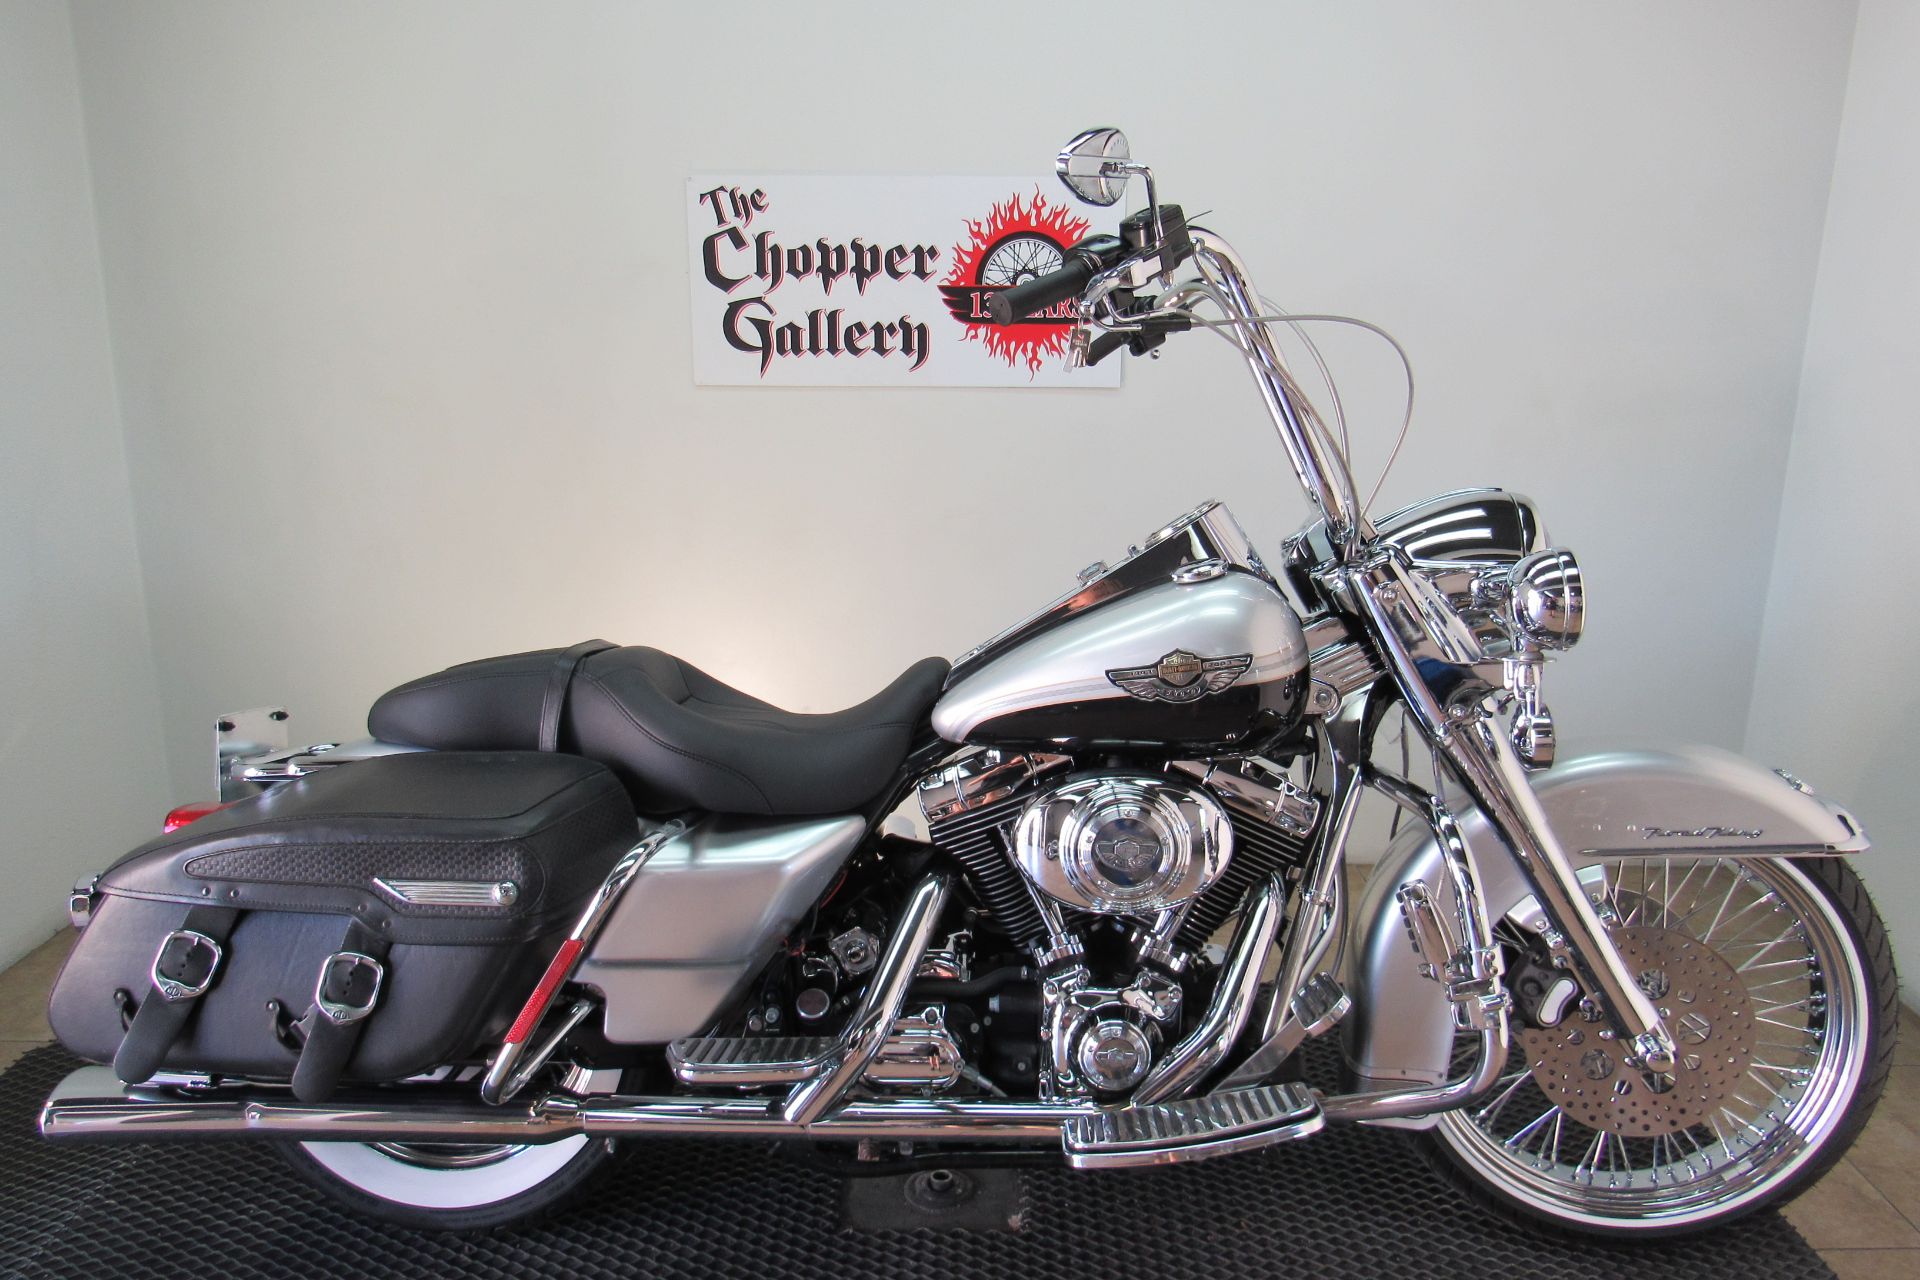 Used 2003 Harley Davidson Road King Classic Motorcycles In Temecula Ca Stock Number V1729703